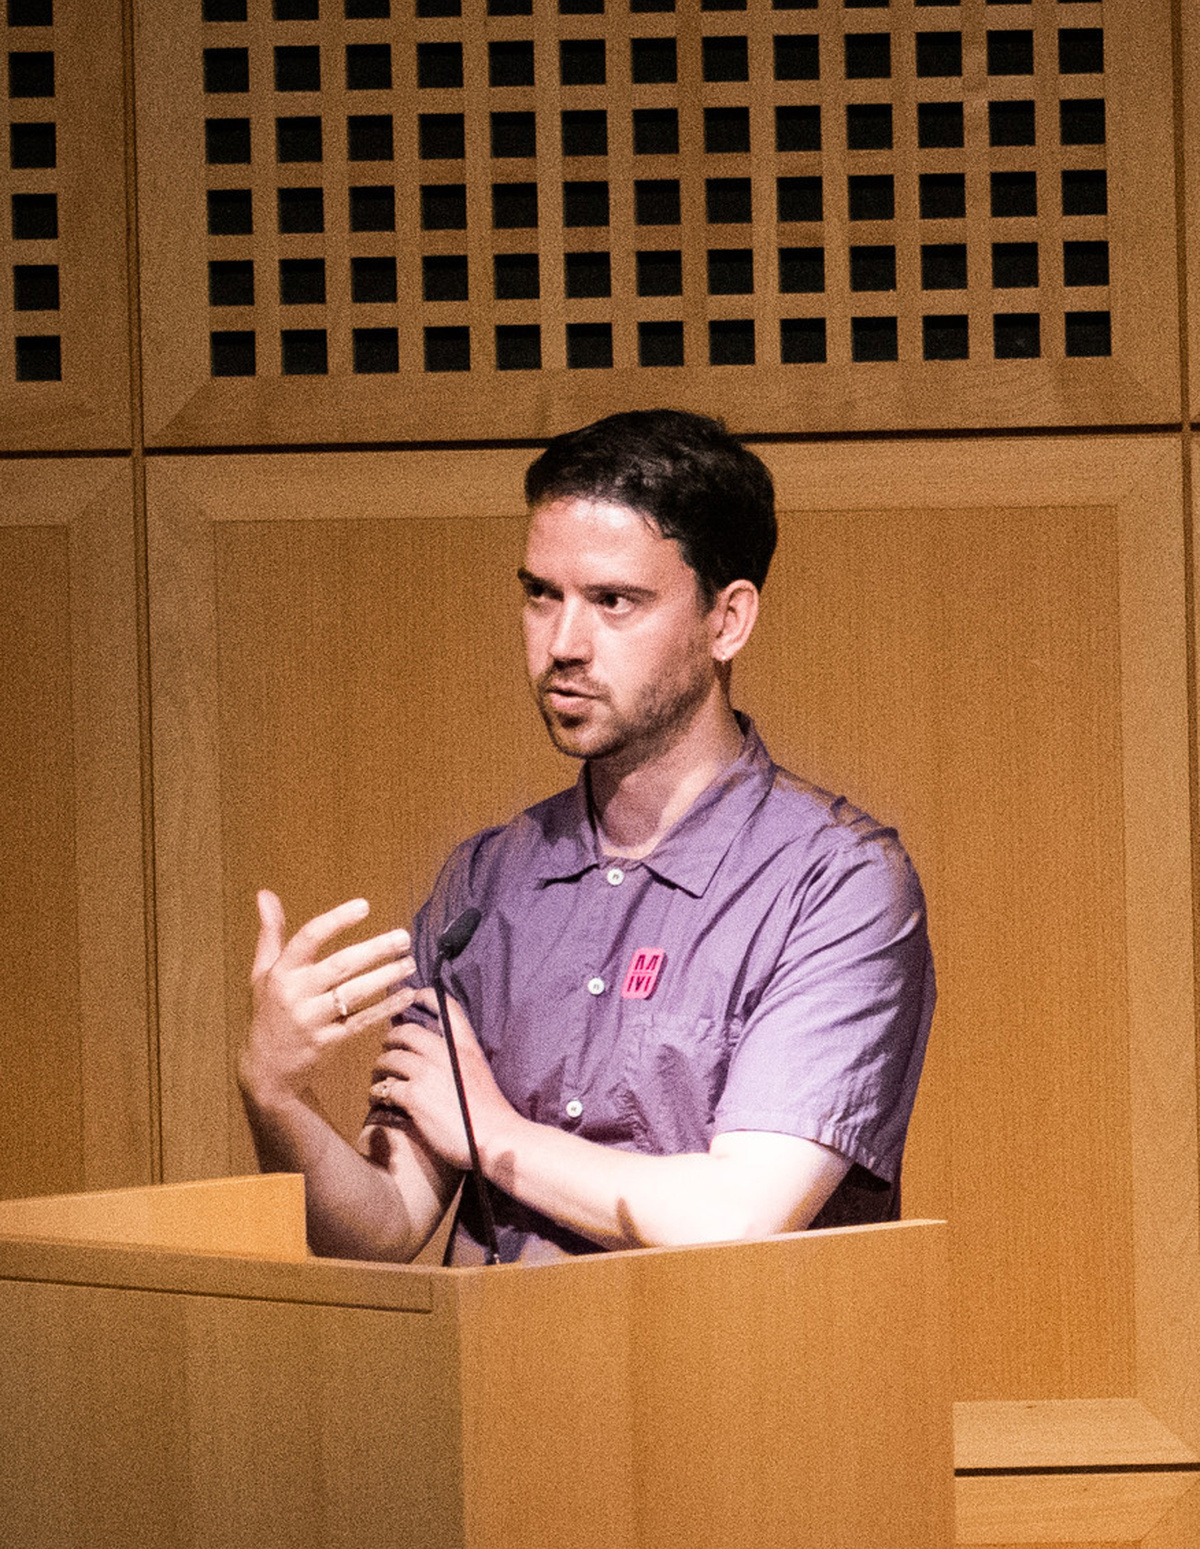 A photograph of Ifor Duncan, he has short black hair, wearing a purple shirt and standing at a podium.